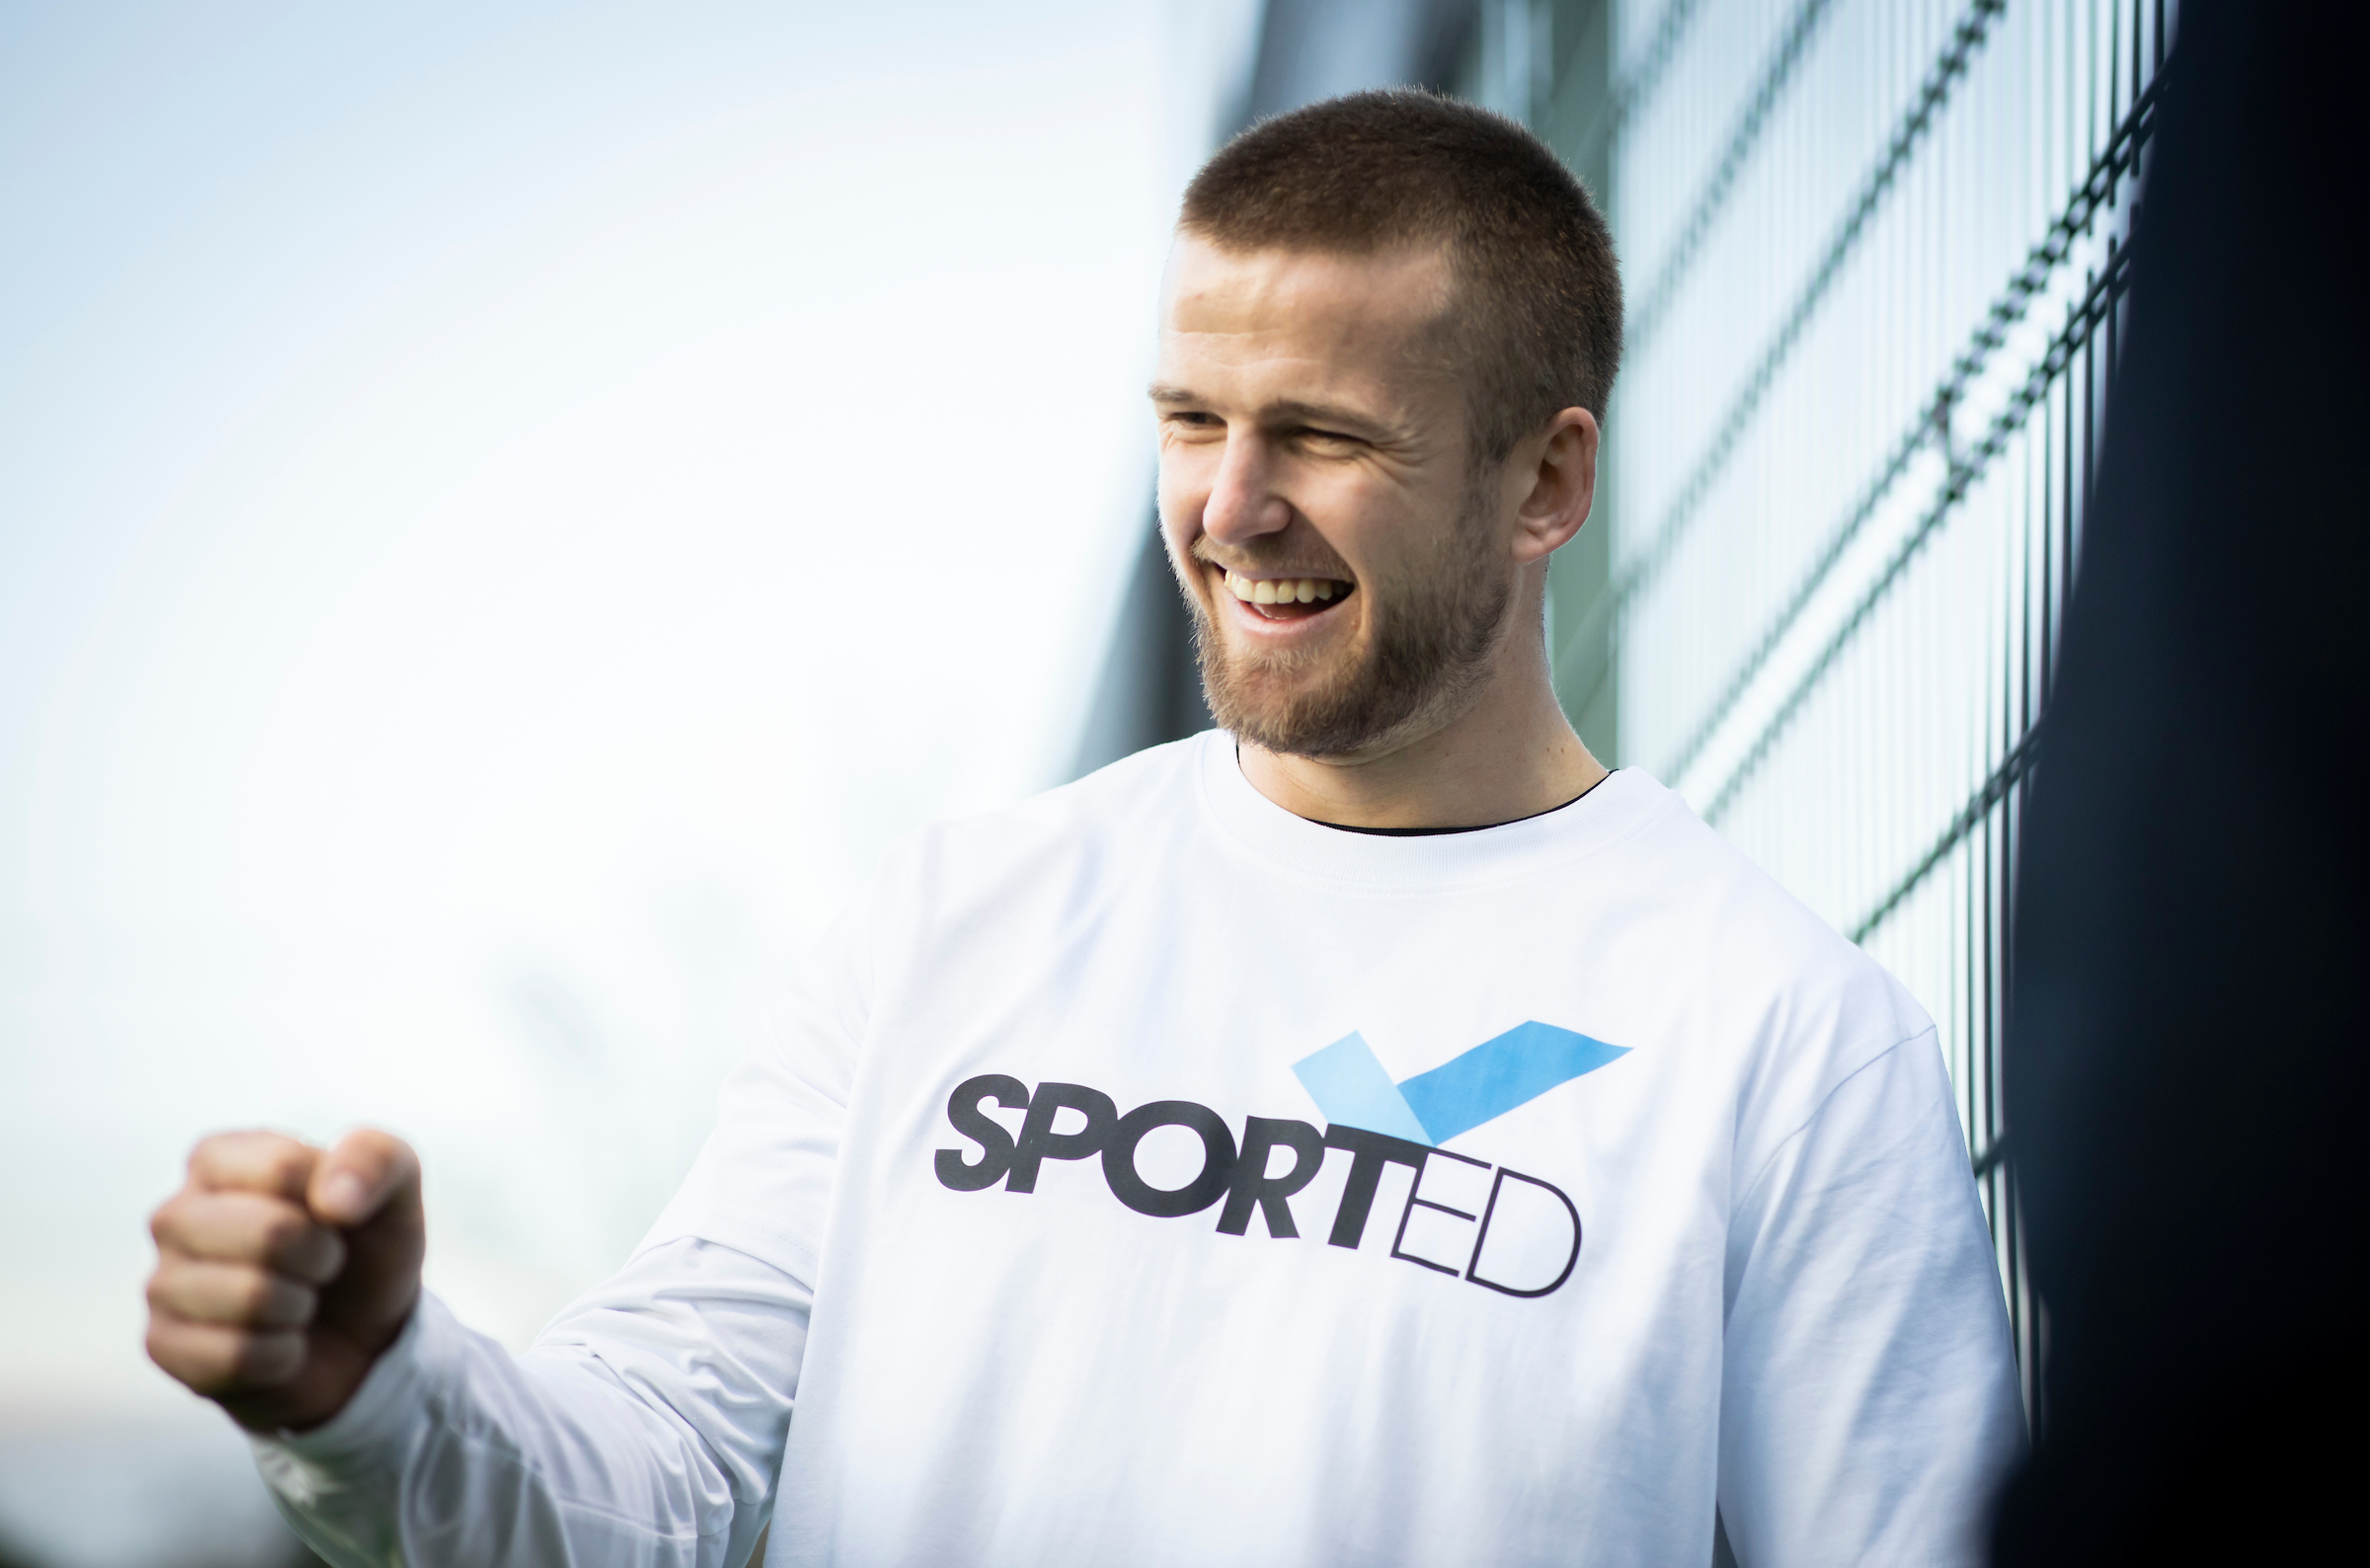 Eric Dier announced as ambassador for Sported